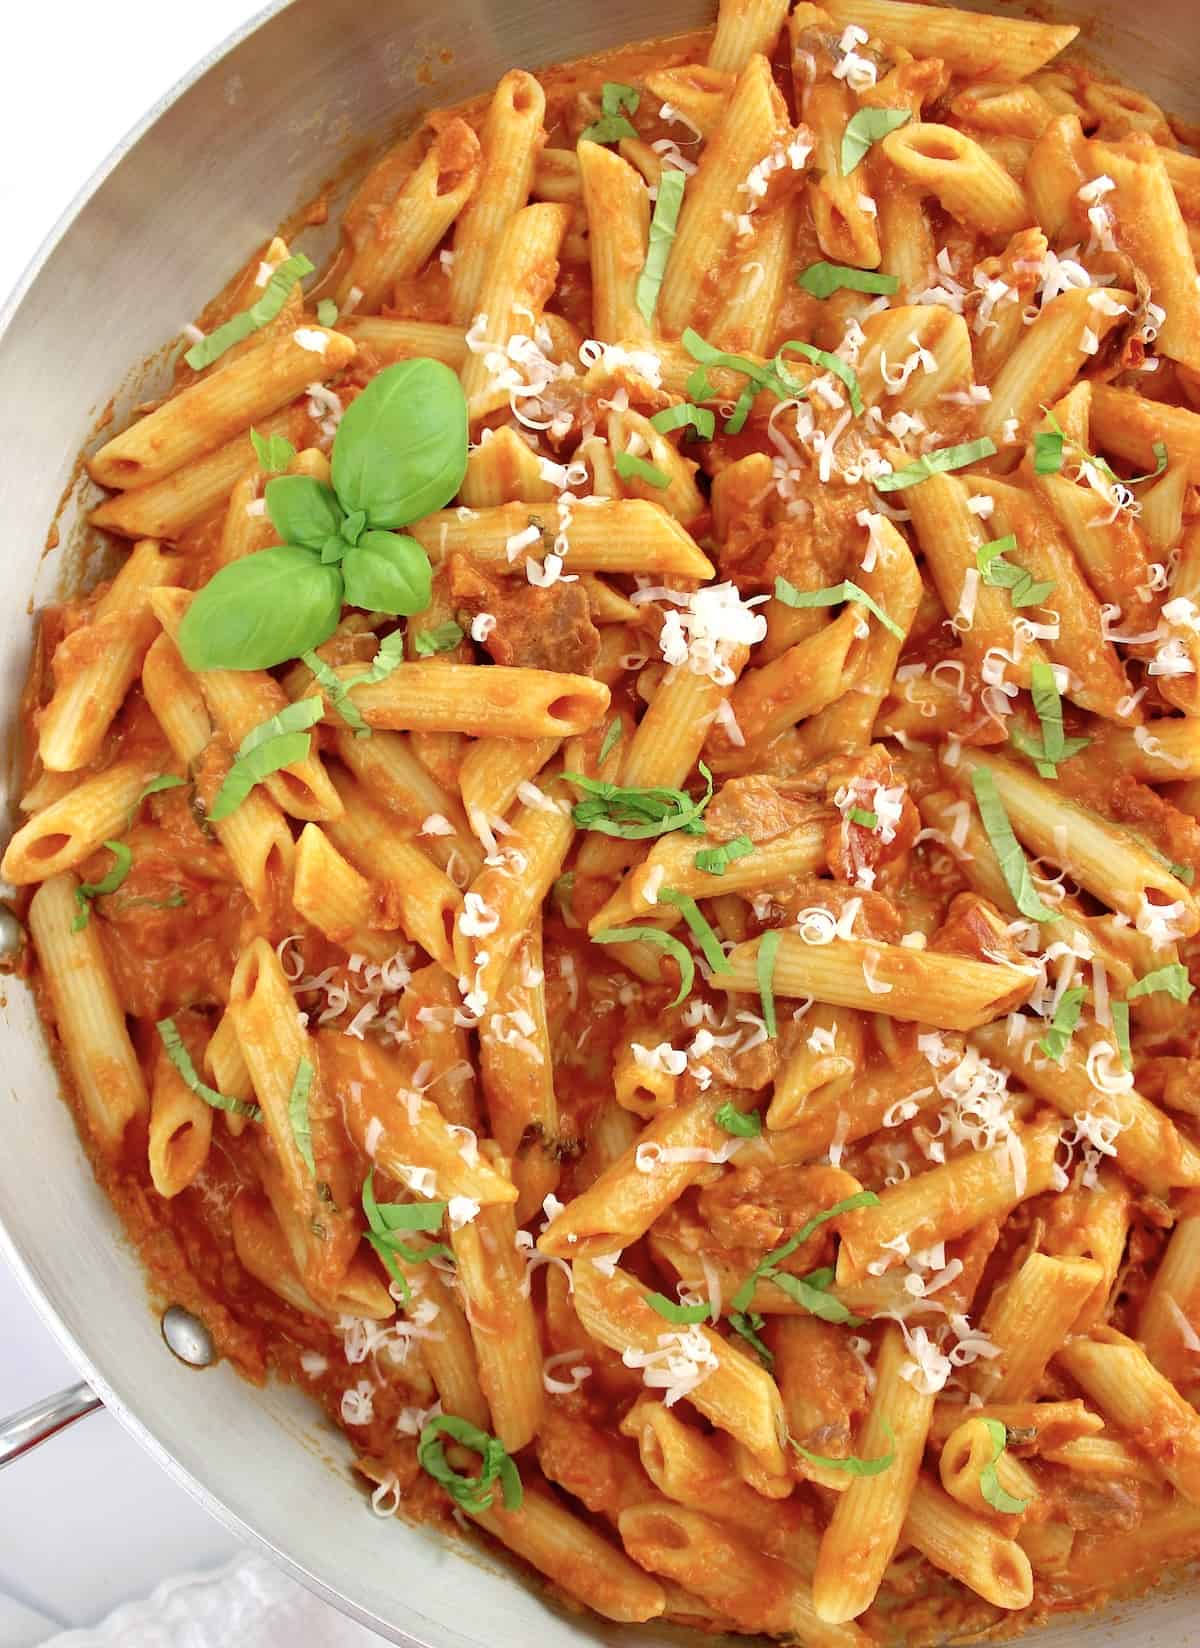 Penne Alla Vodka with basil and parmesan cheese on top